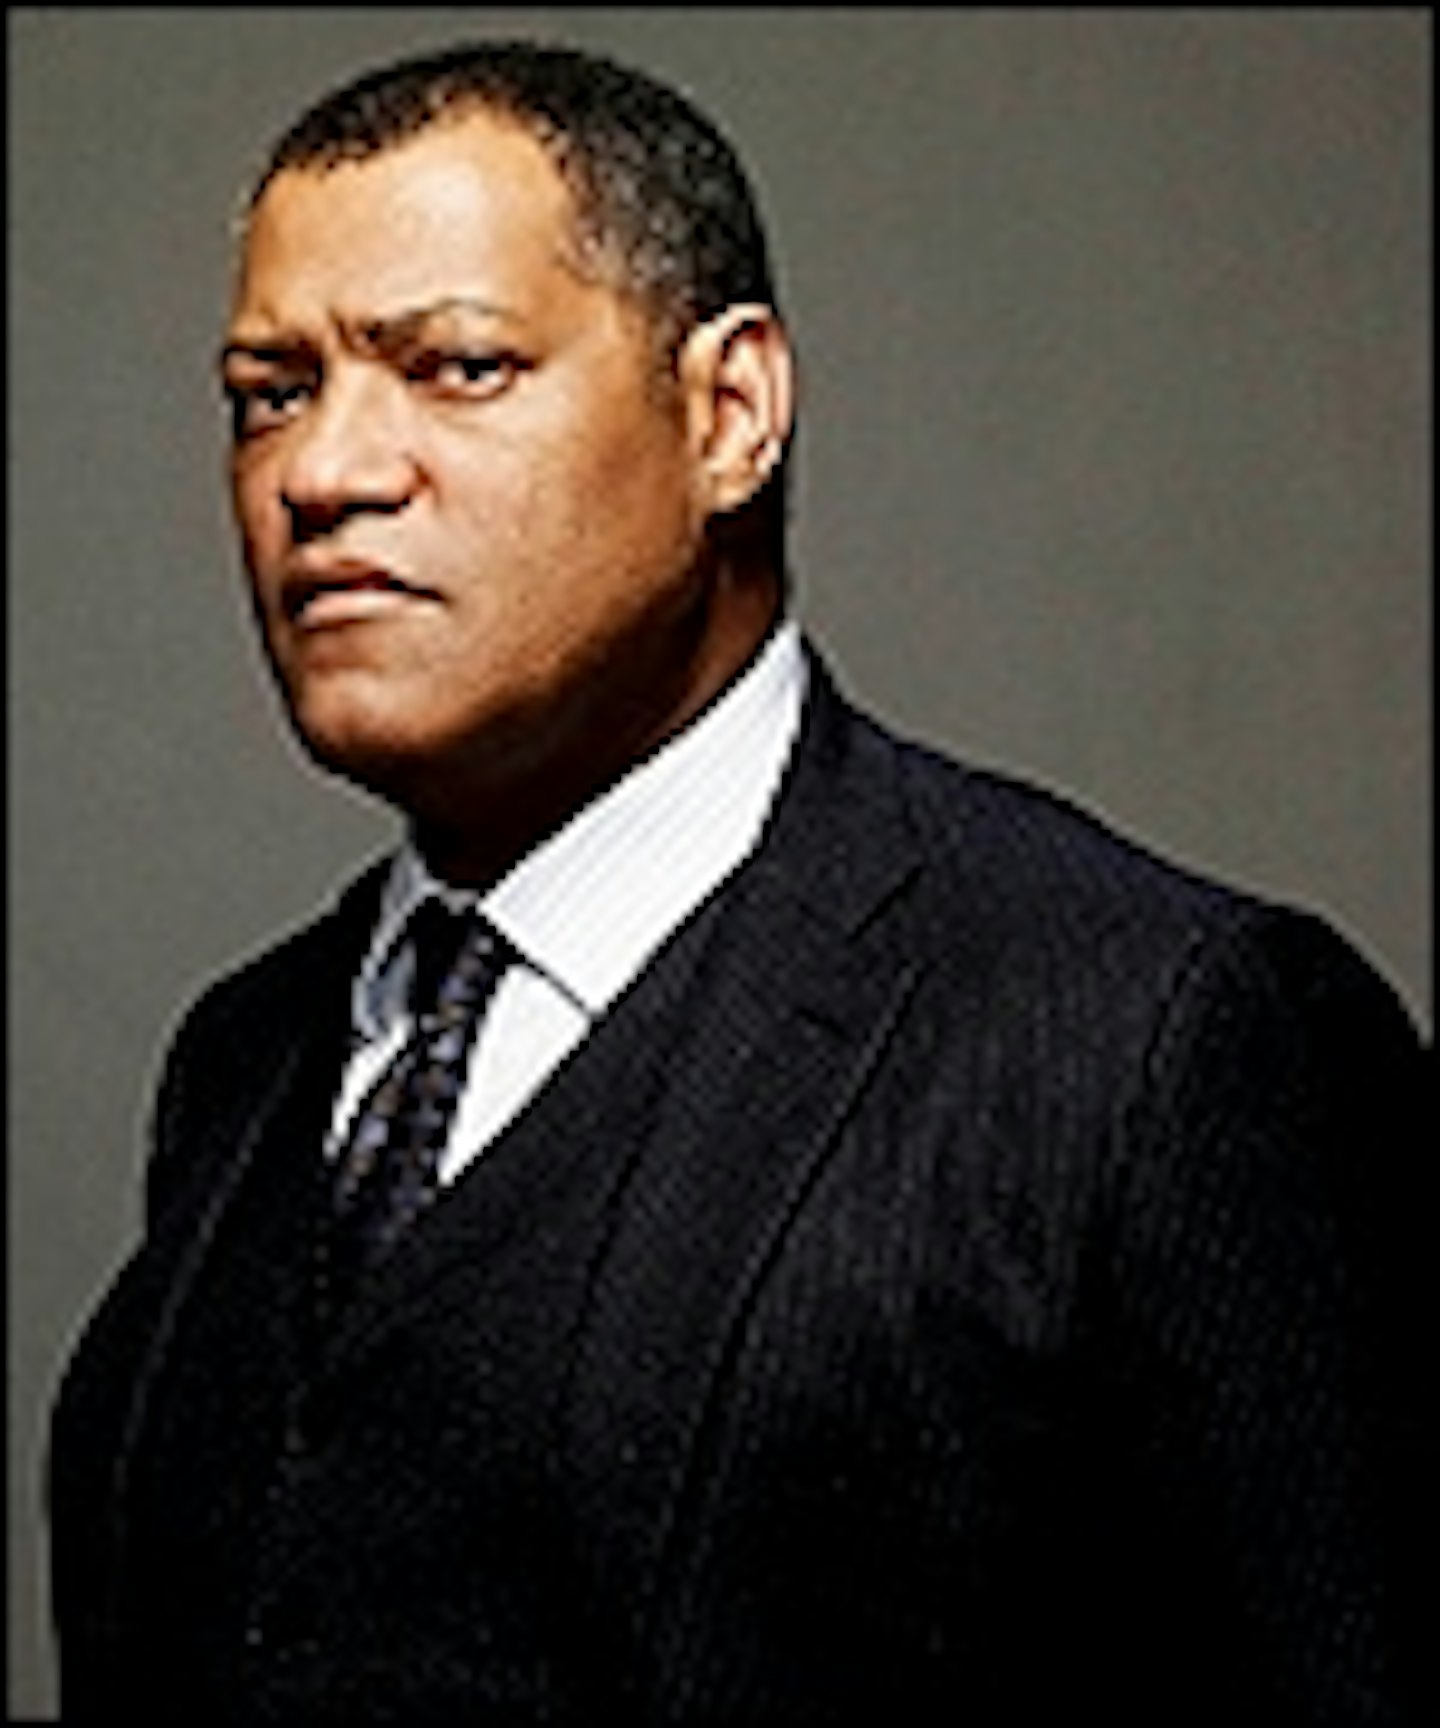 Laurence Fishburne Is Perry White